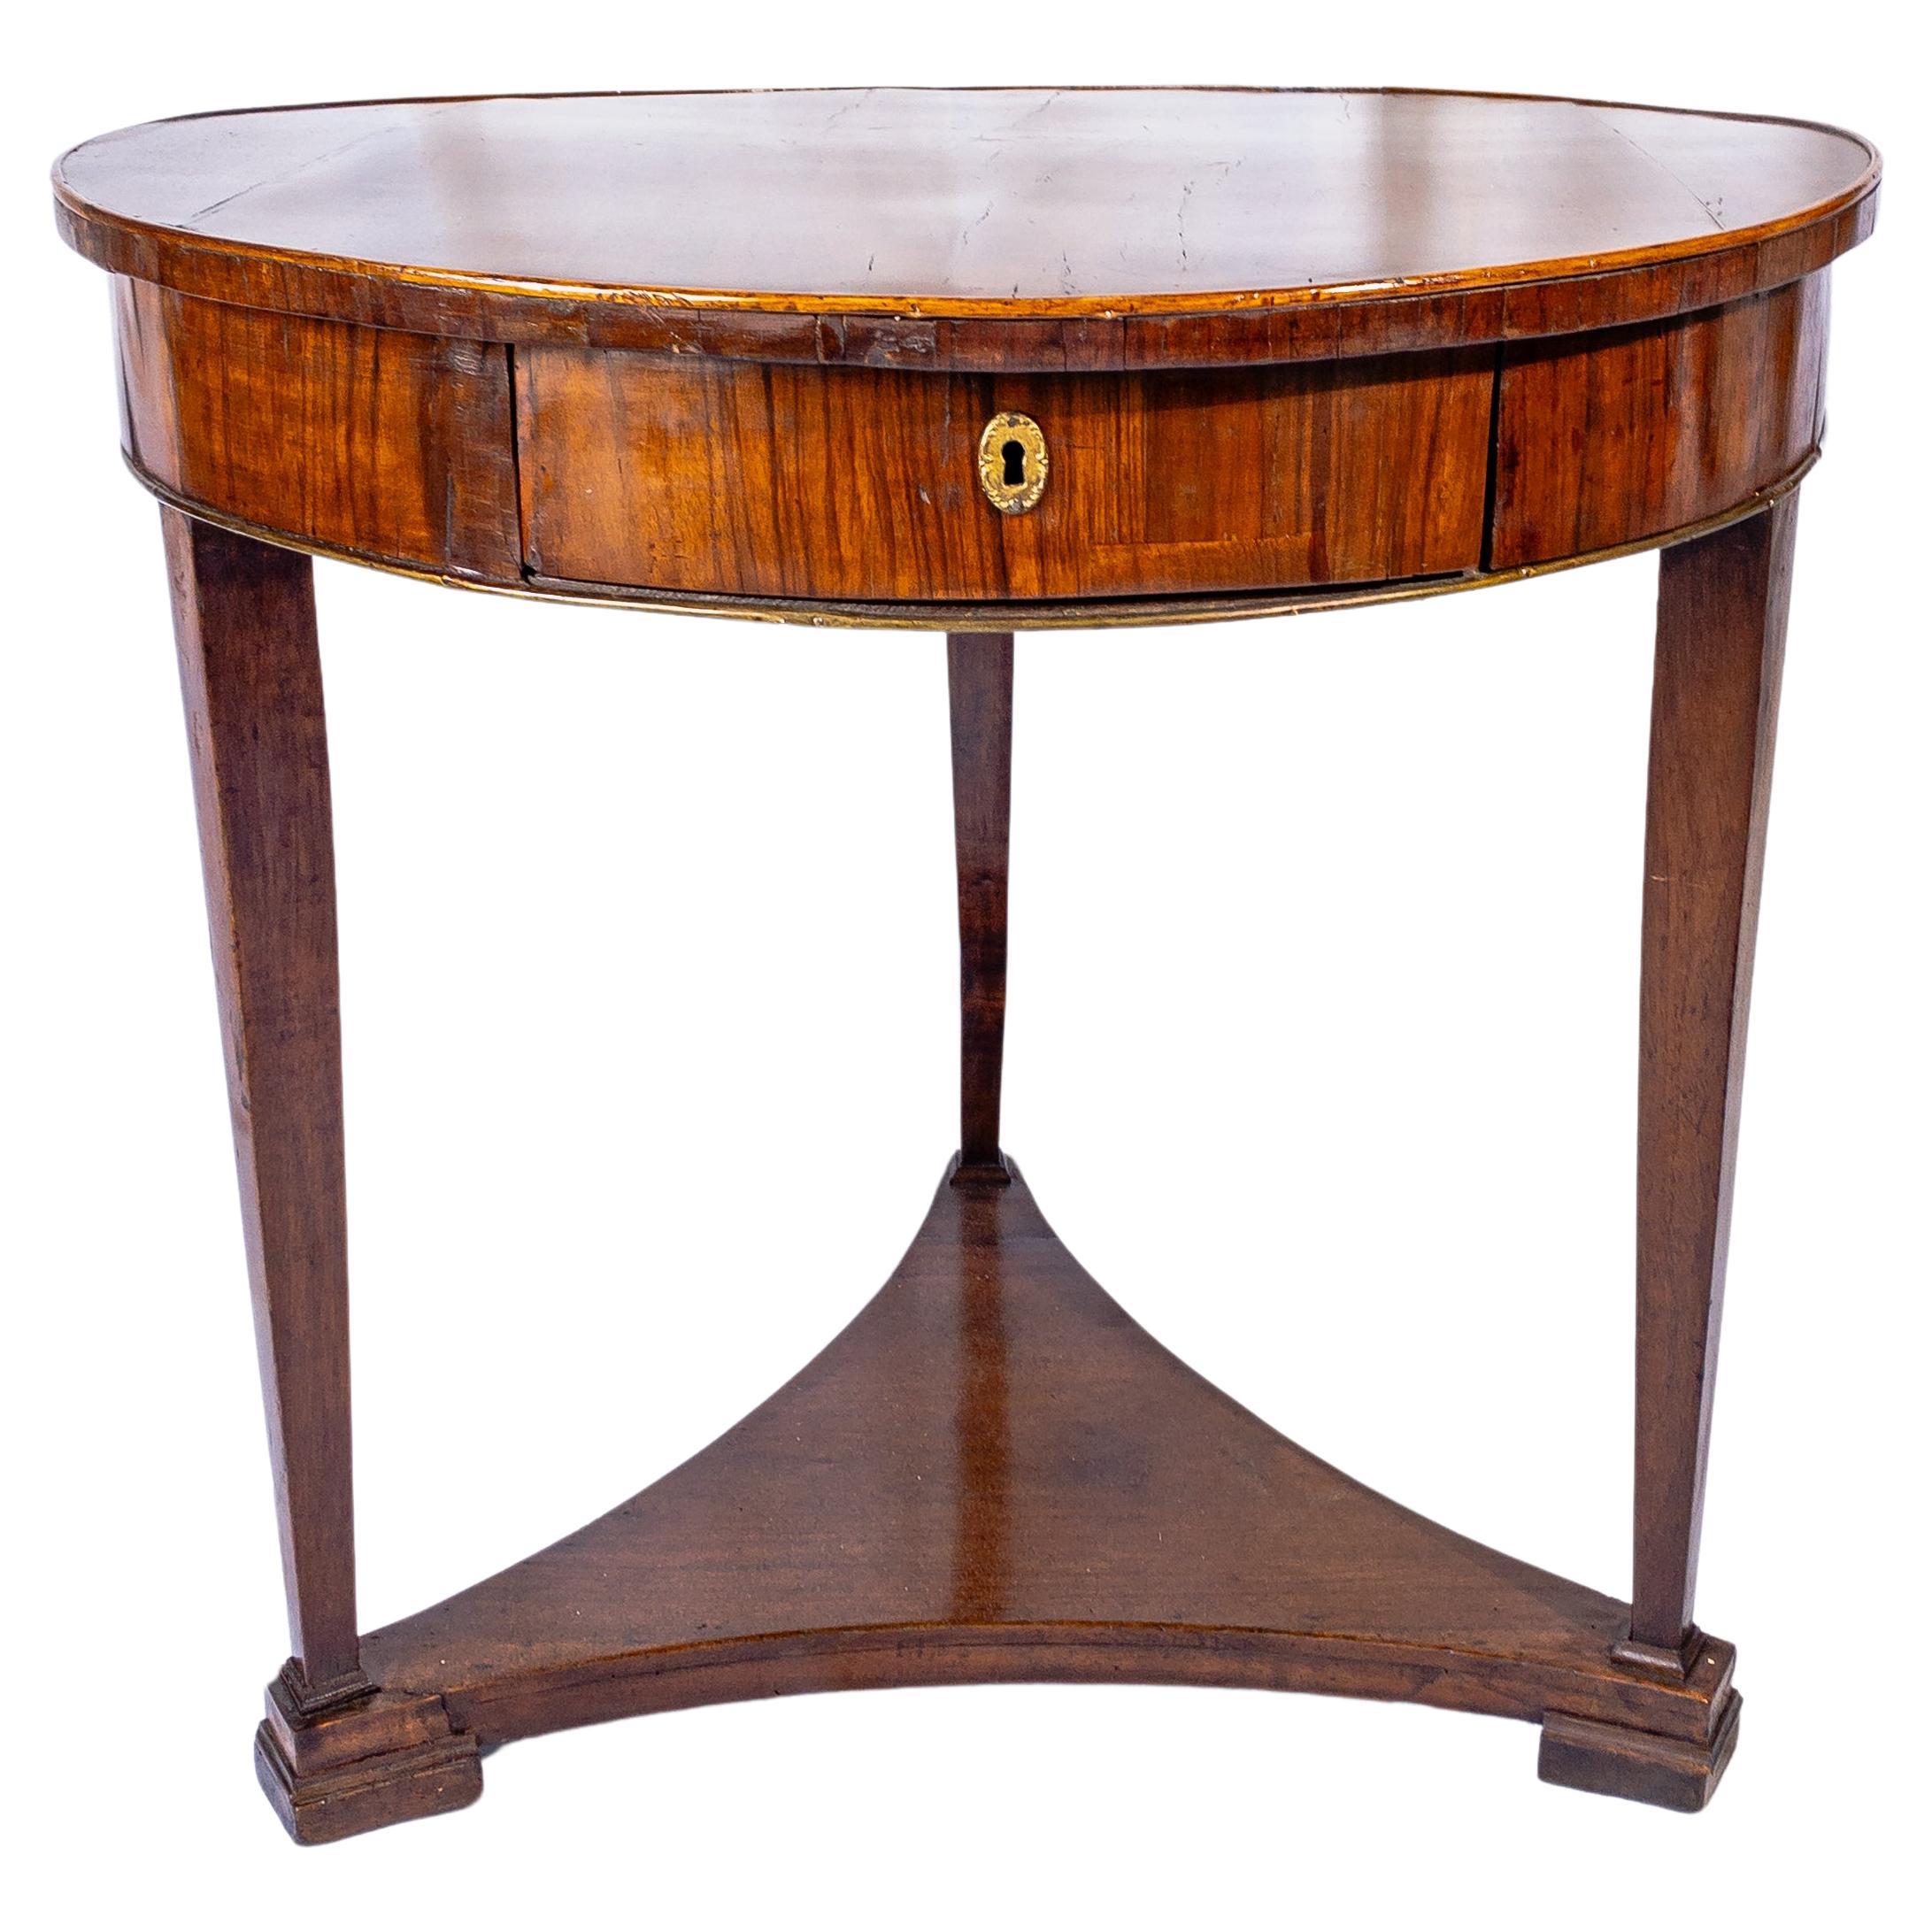 19th Century Italian Walnut Gueridon Table with Trifold Base & Lock Drawer For Sale